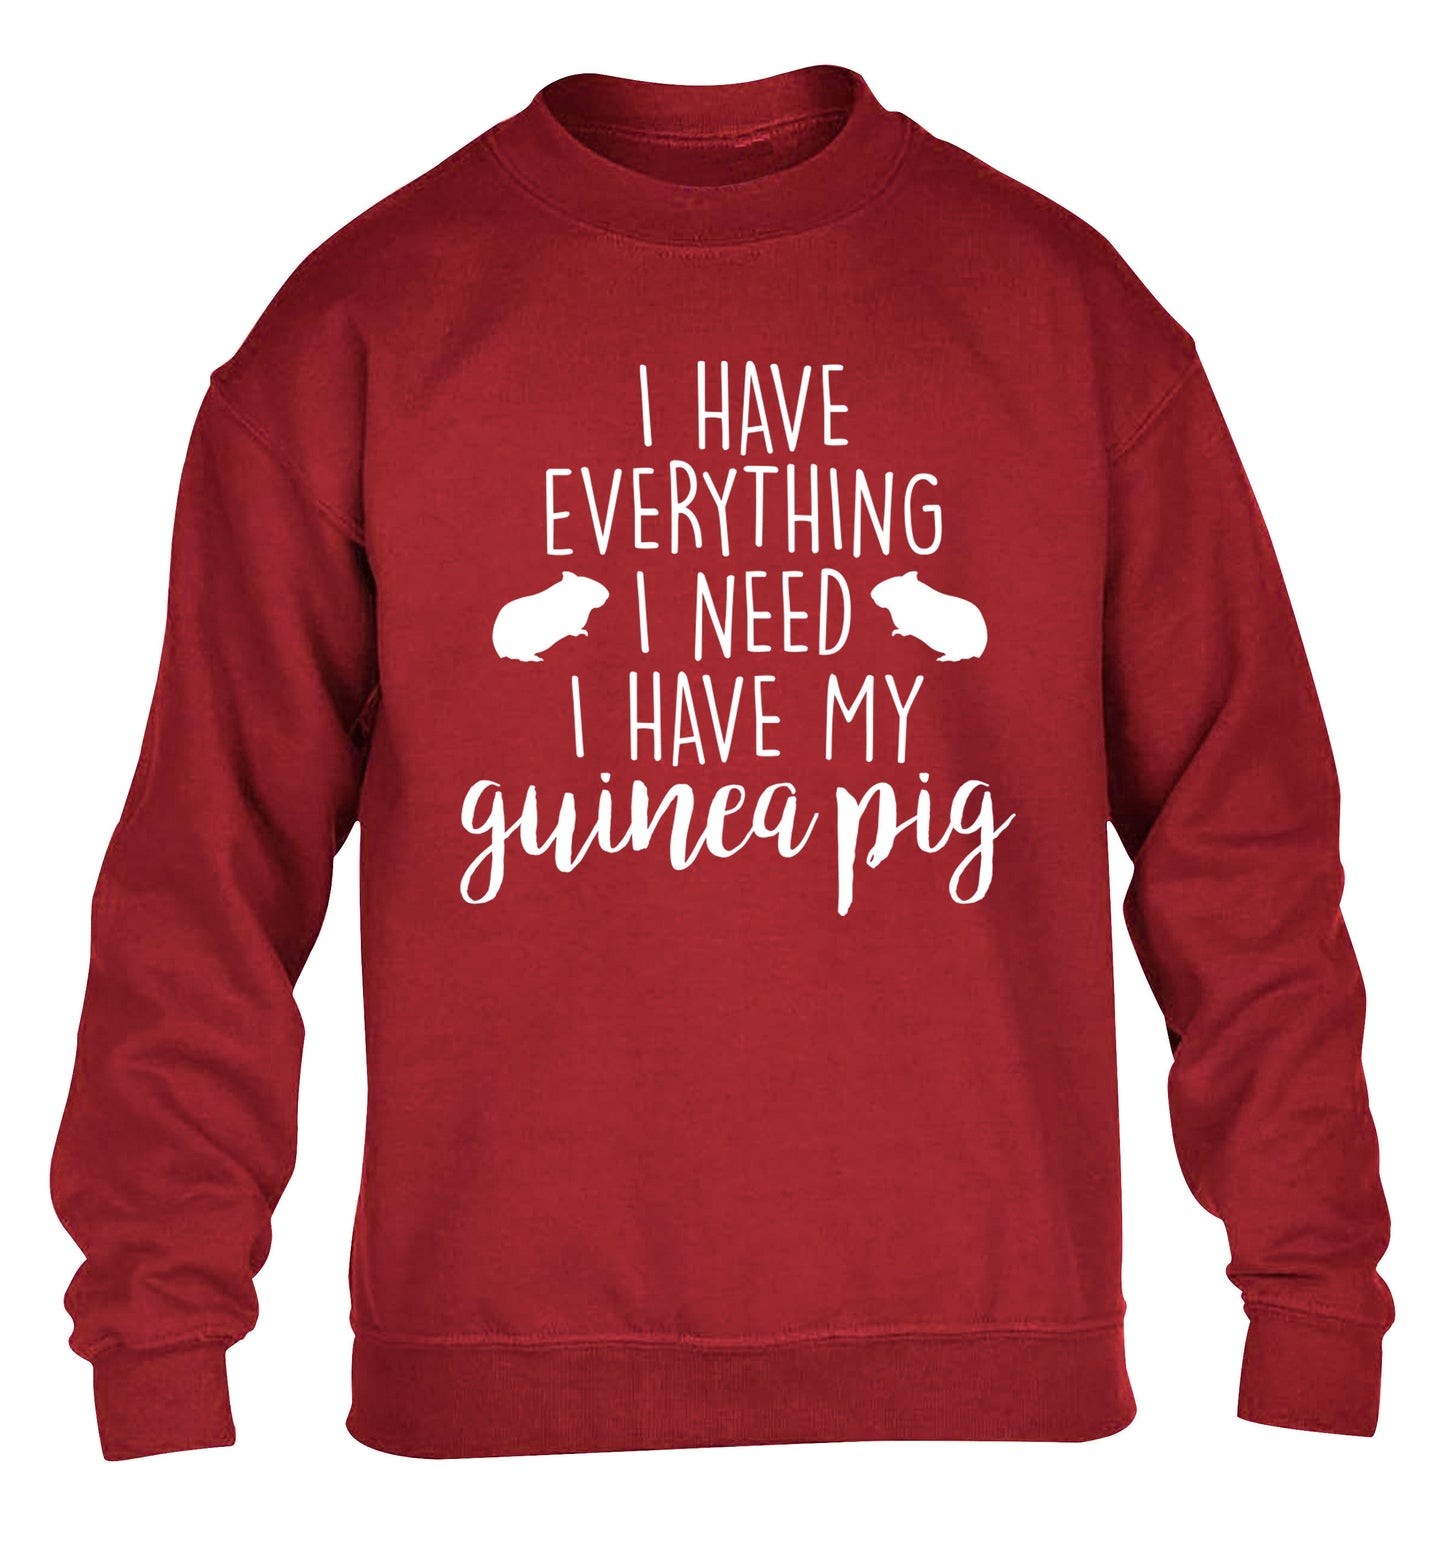 I have everything I need, I have my guinea pig children's grey  sweater 12-14 Years